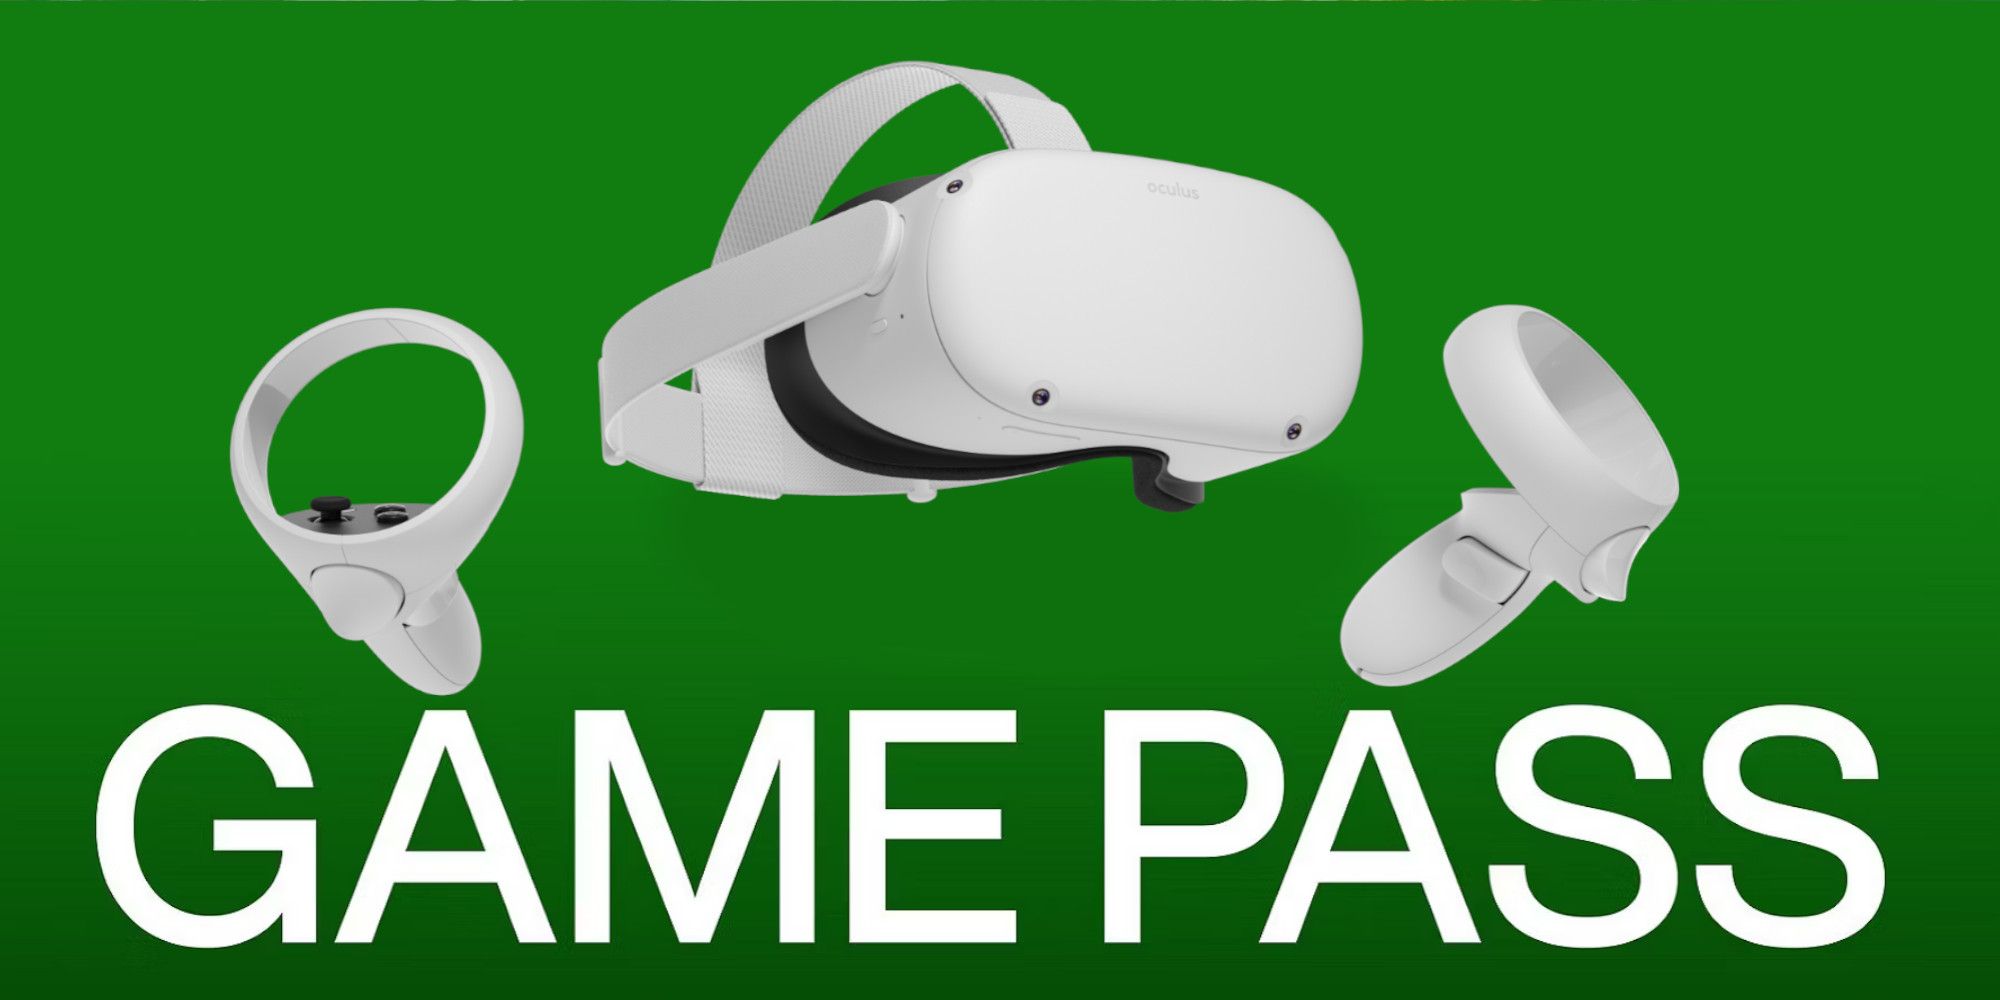 Xbox Game Pass is coming to Oculus through a VR TV and it's as